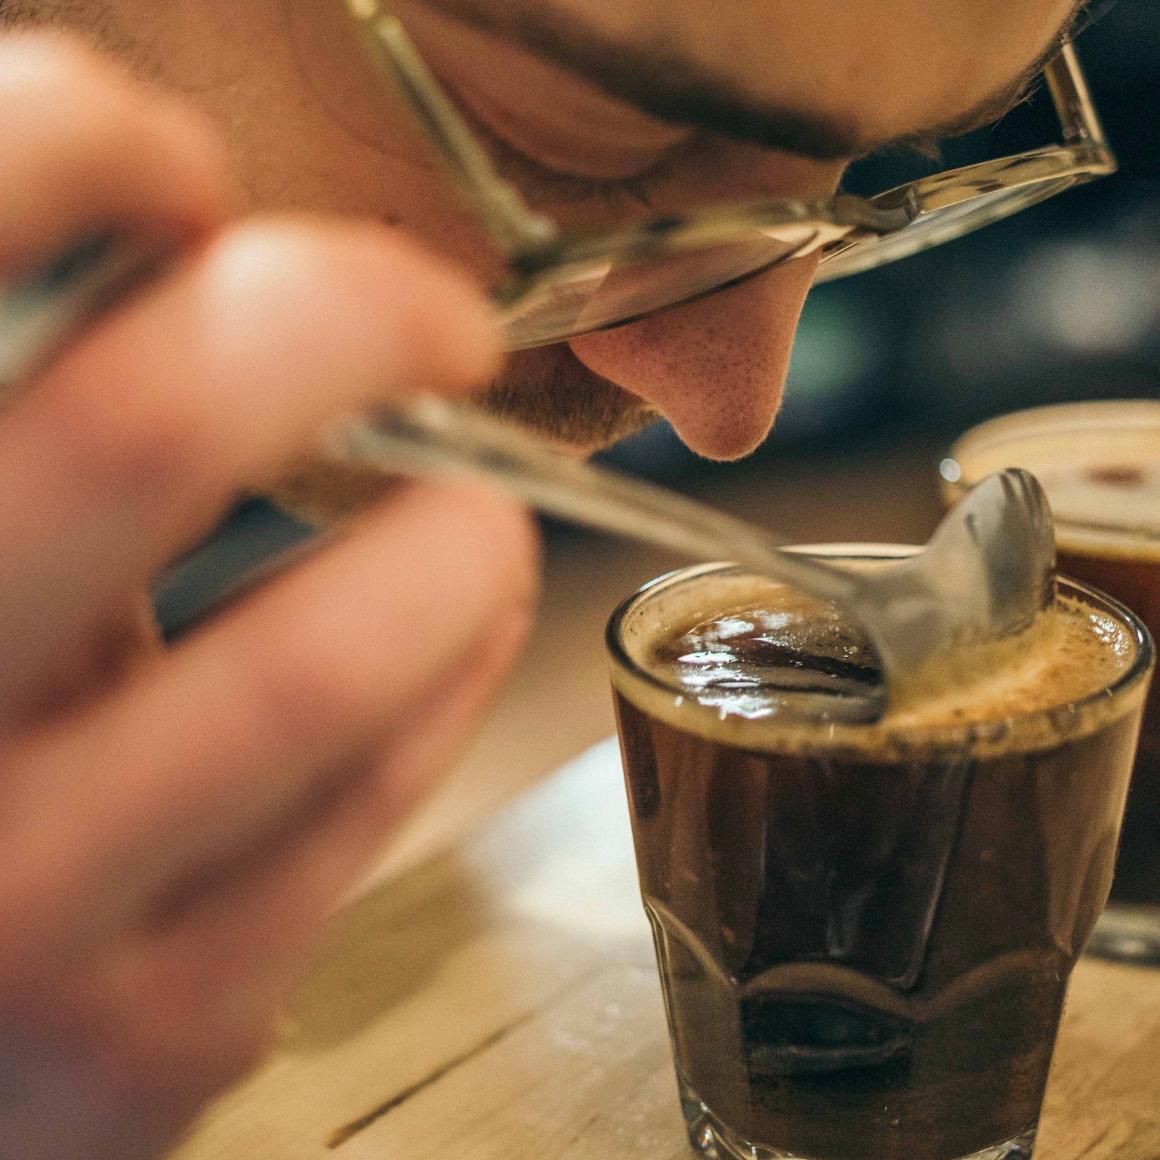 A man puts his nose over a glass of coffee to determine its aroma. image link to story